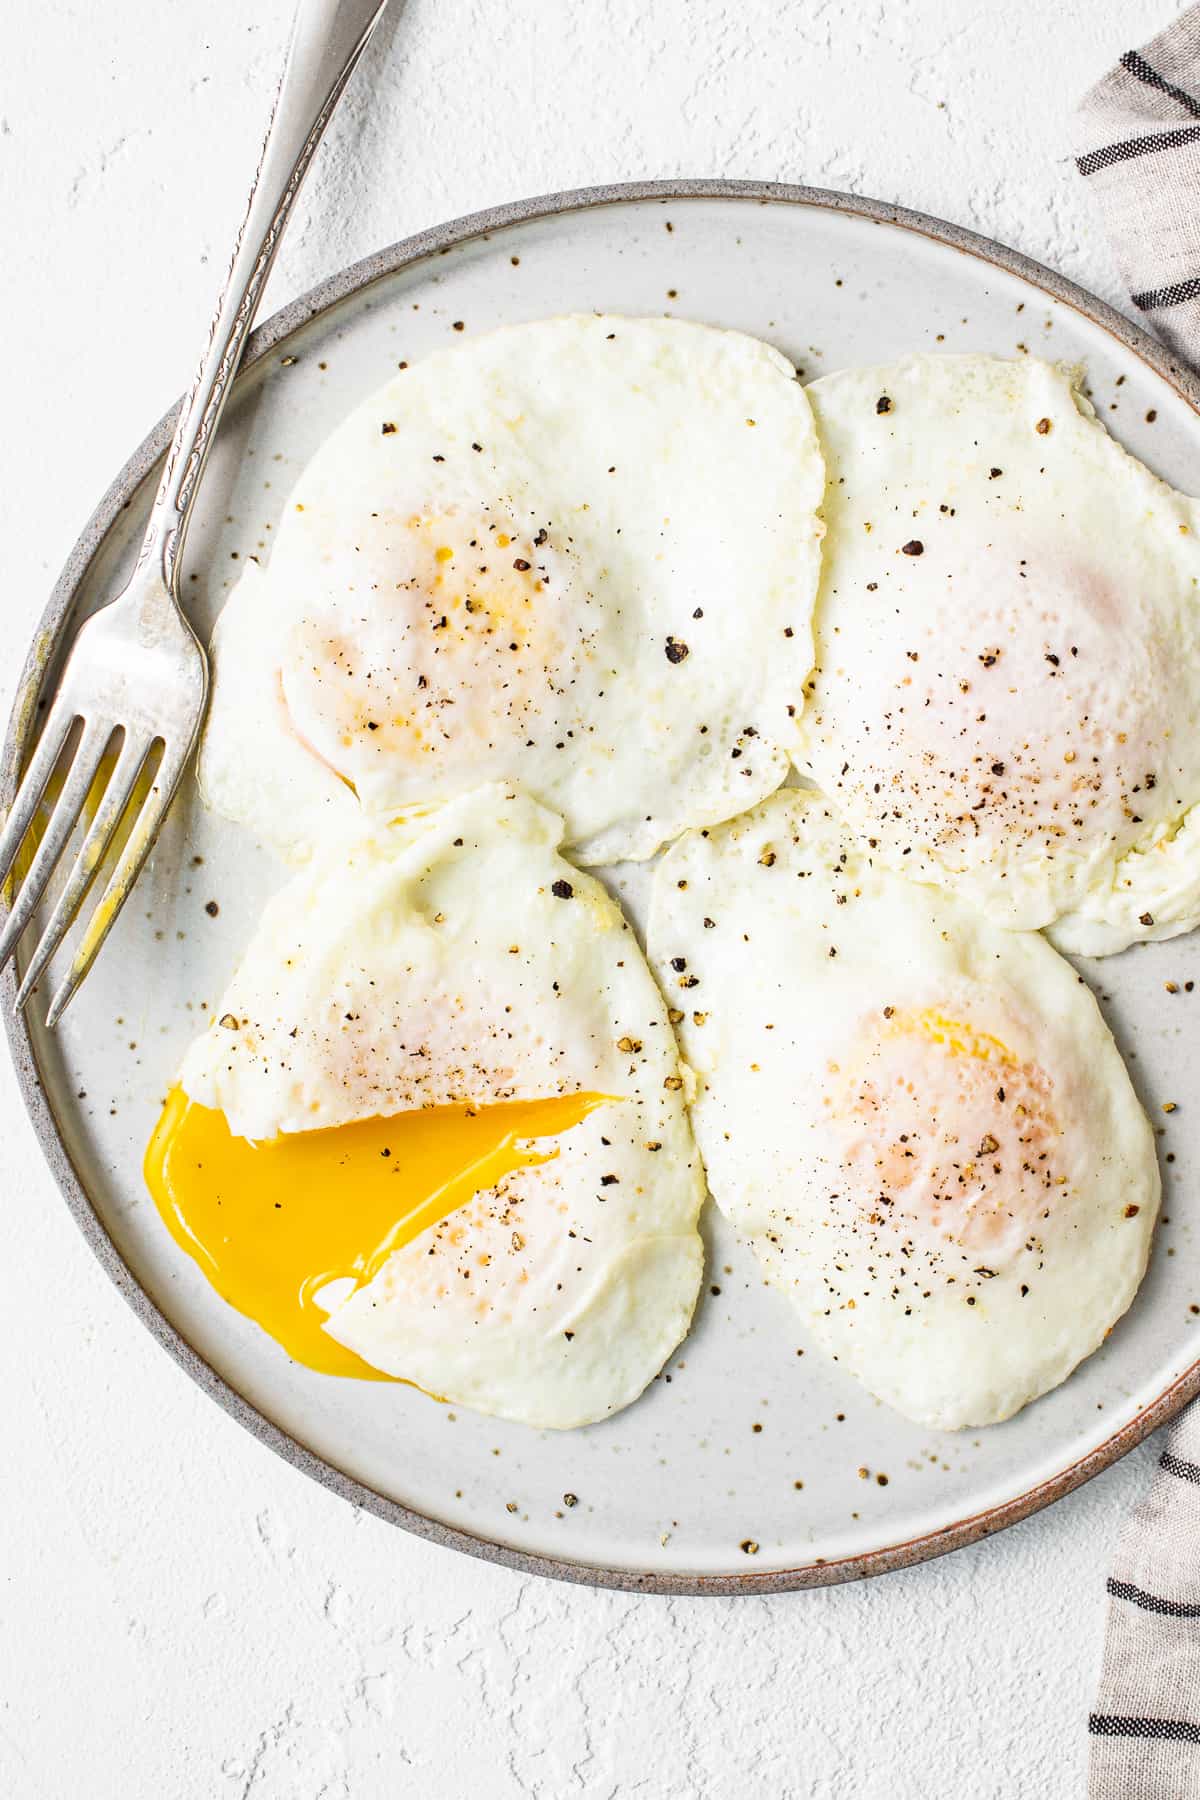 Over easy eggs on a plate.